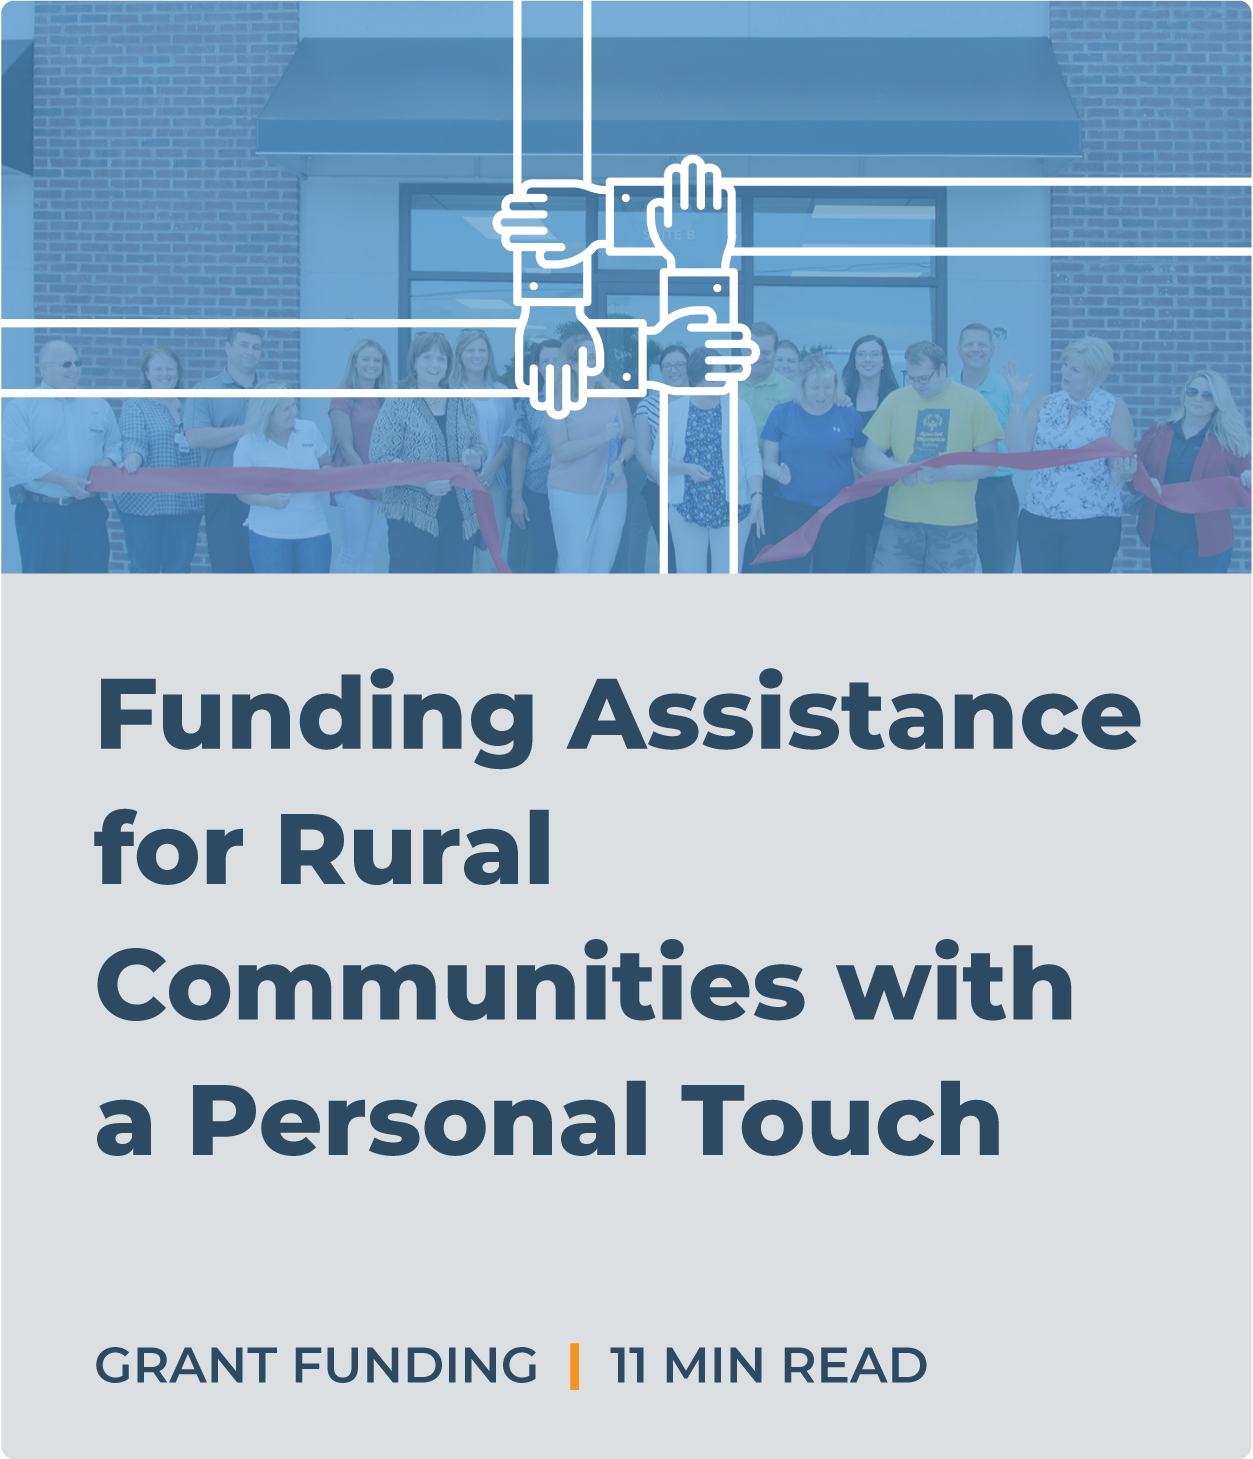 Funding Assistance for Rural Communities with a Personal Touch